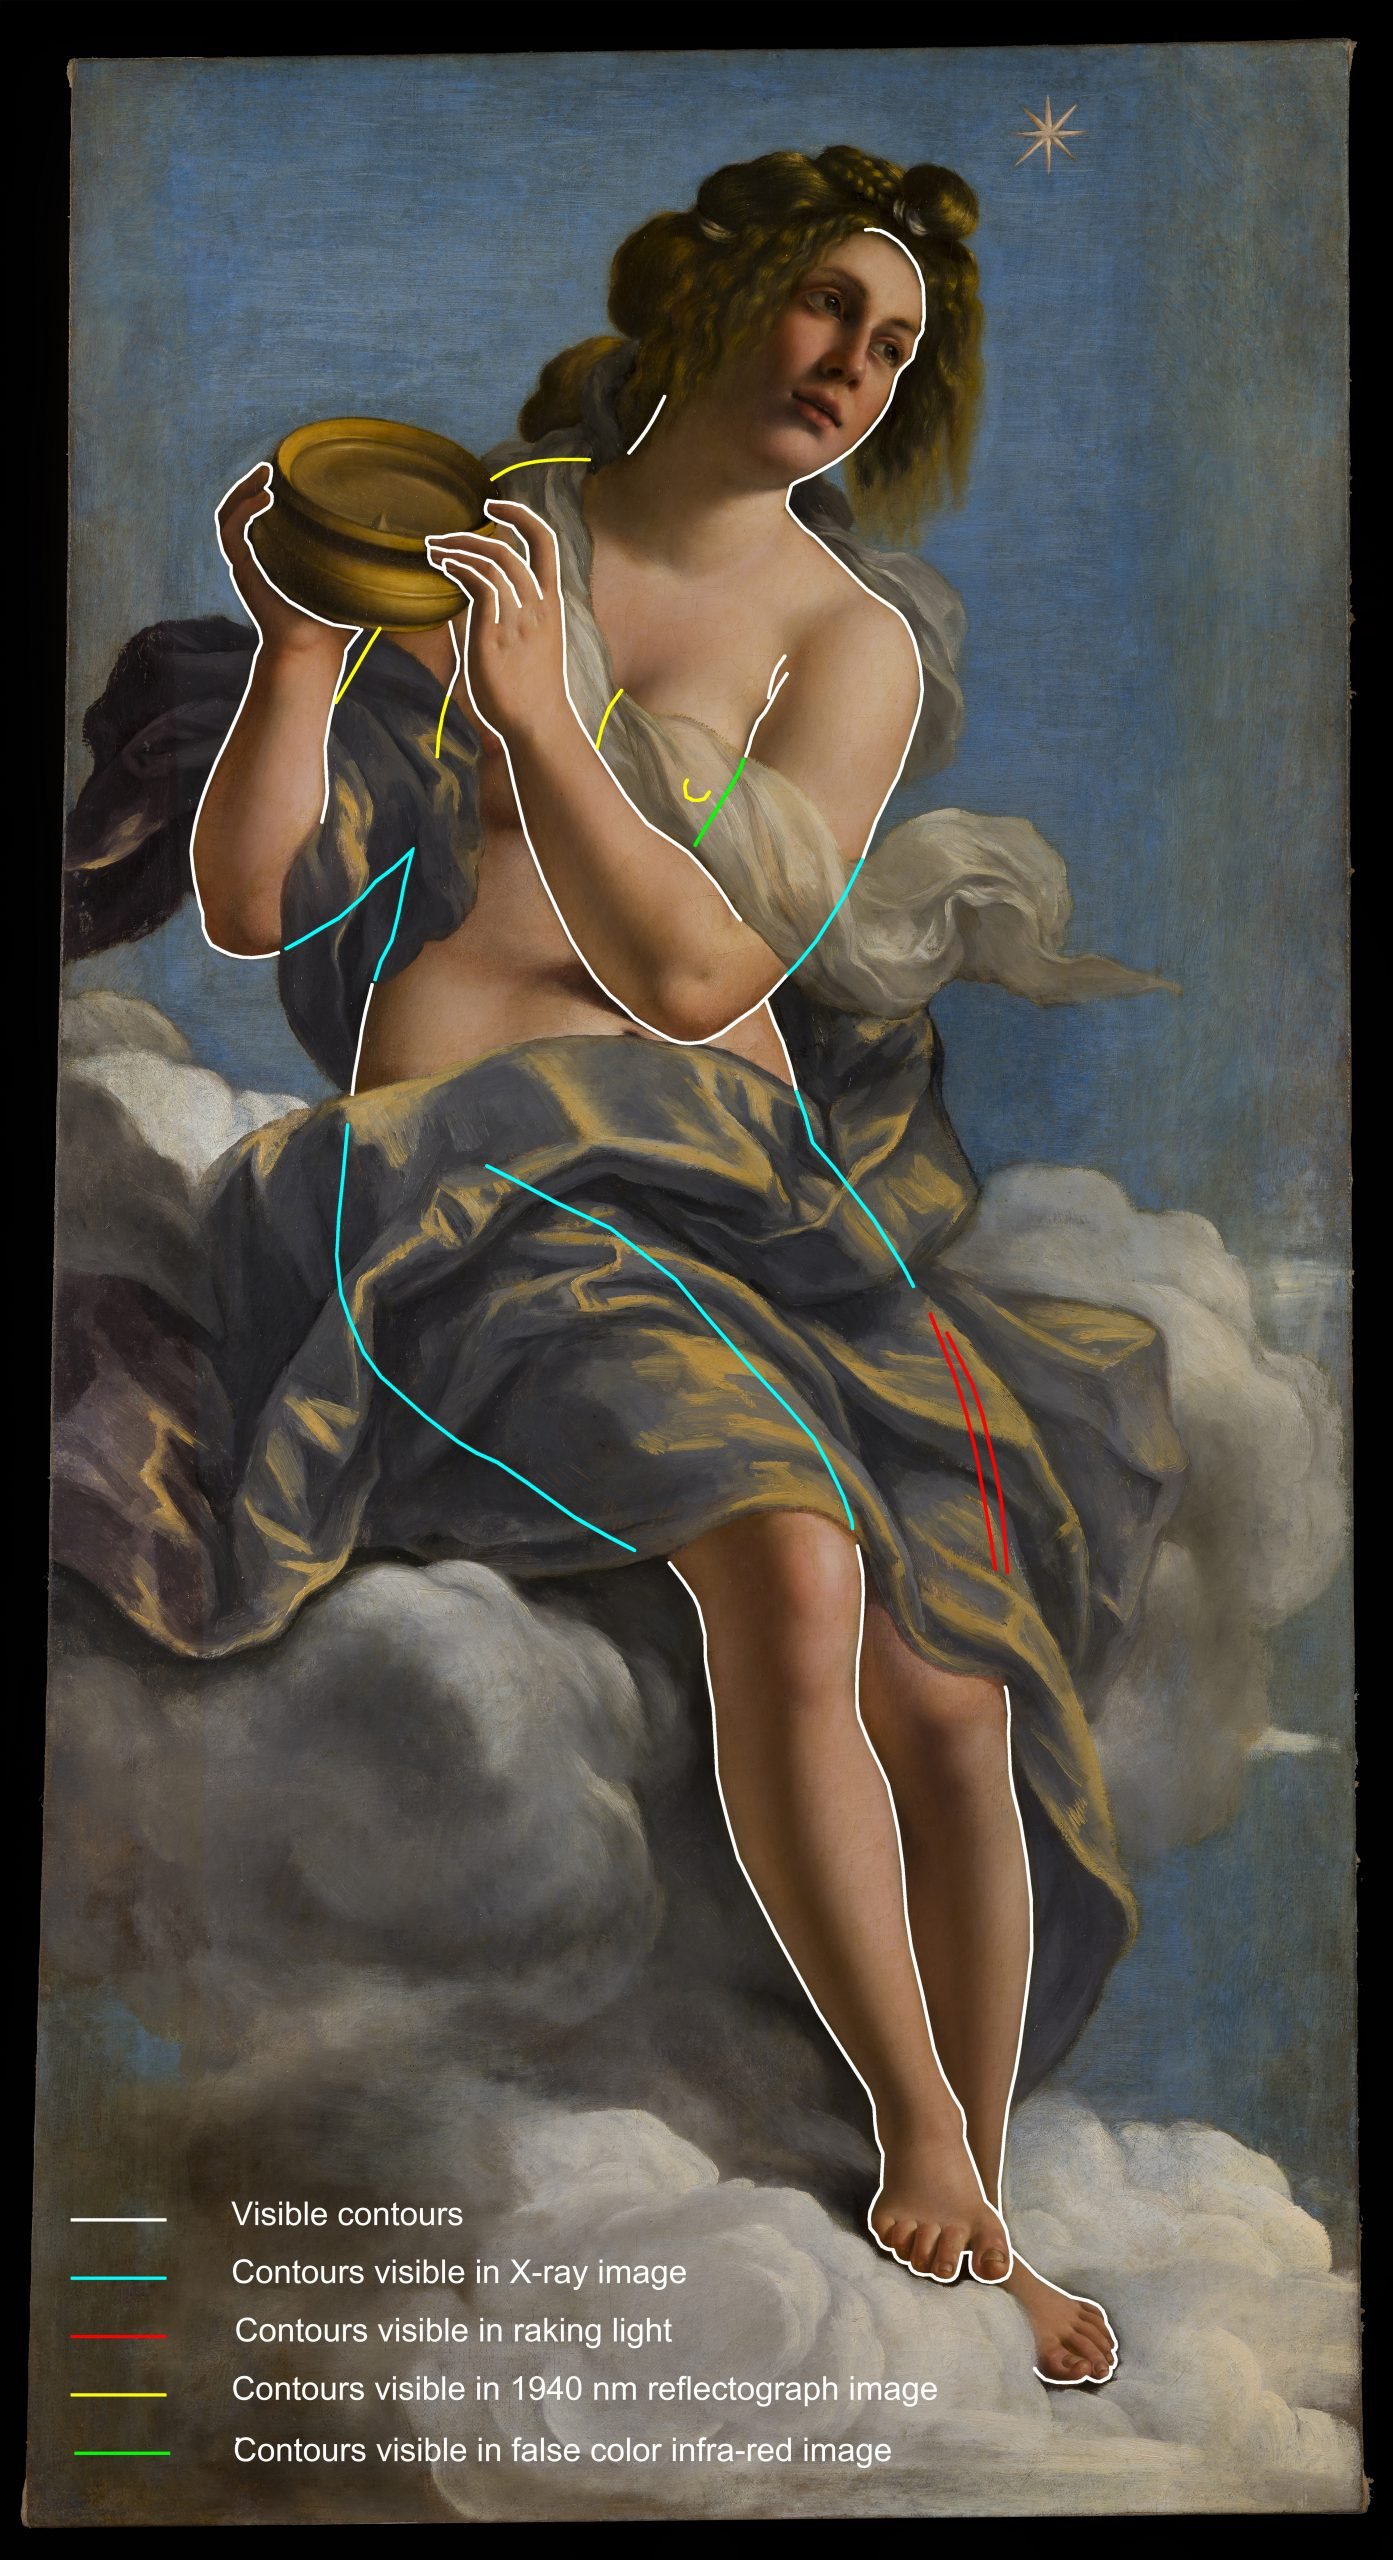 Artemisia Gentileschi, Allegory of Inclination (1816), with contours traced in visible light and using diagnostic ph. Photo courtesy of the Casa Buonarroti, Florence.